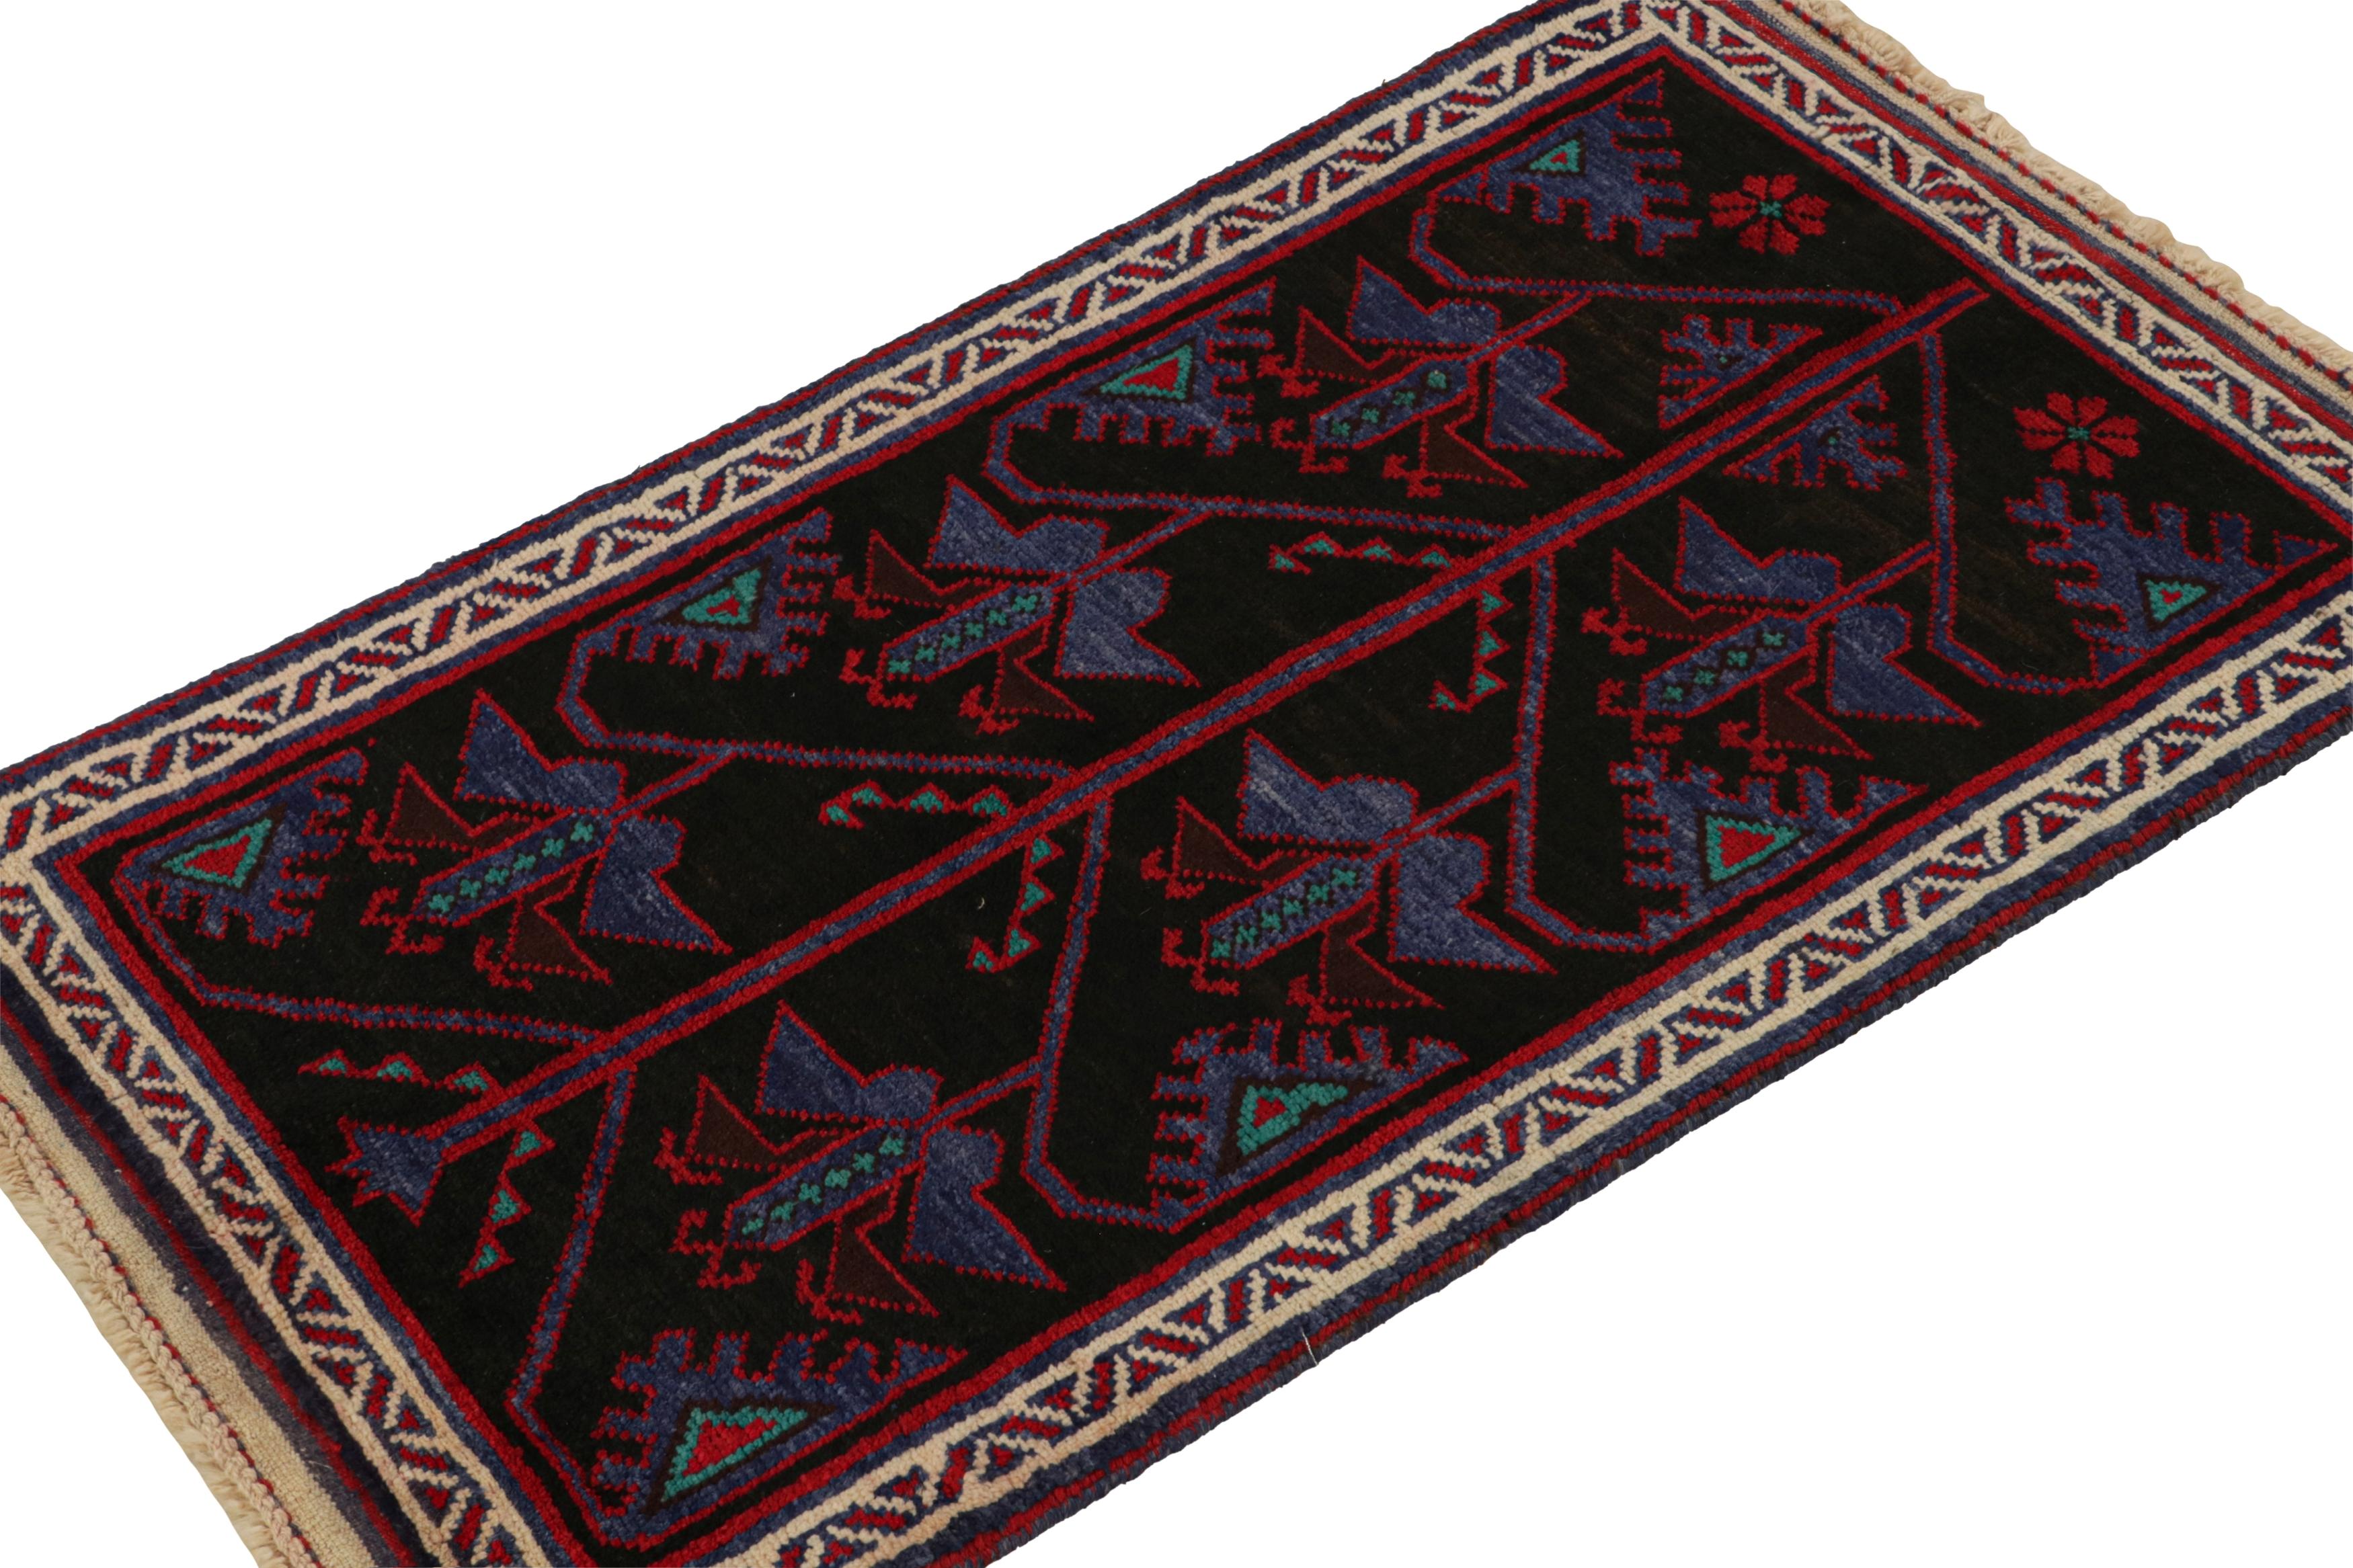 Hand-knotted in wool, this 3x5 Baluch Persian rug of the 1950s is the latest to enter Rug & Kilim’s Antique & Vintage collection.

On the Design:

The Persian Baluch rug carries patterns in rich tones of red & blue on black. The field is encased in